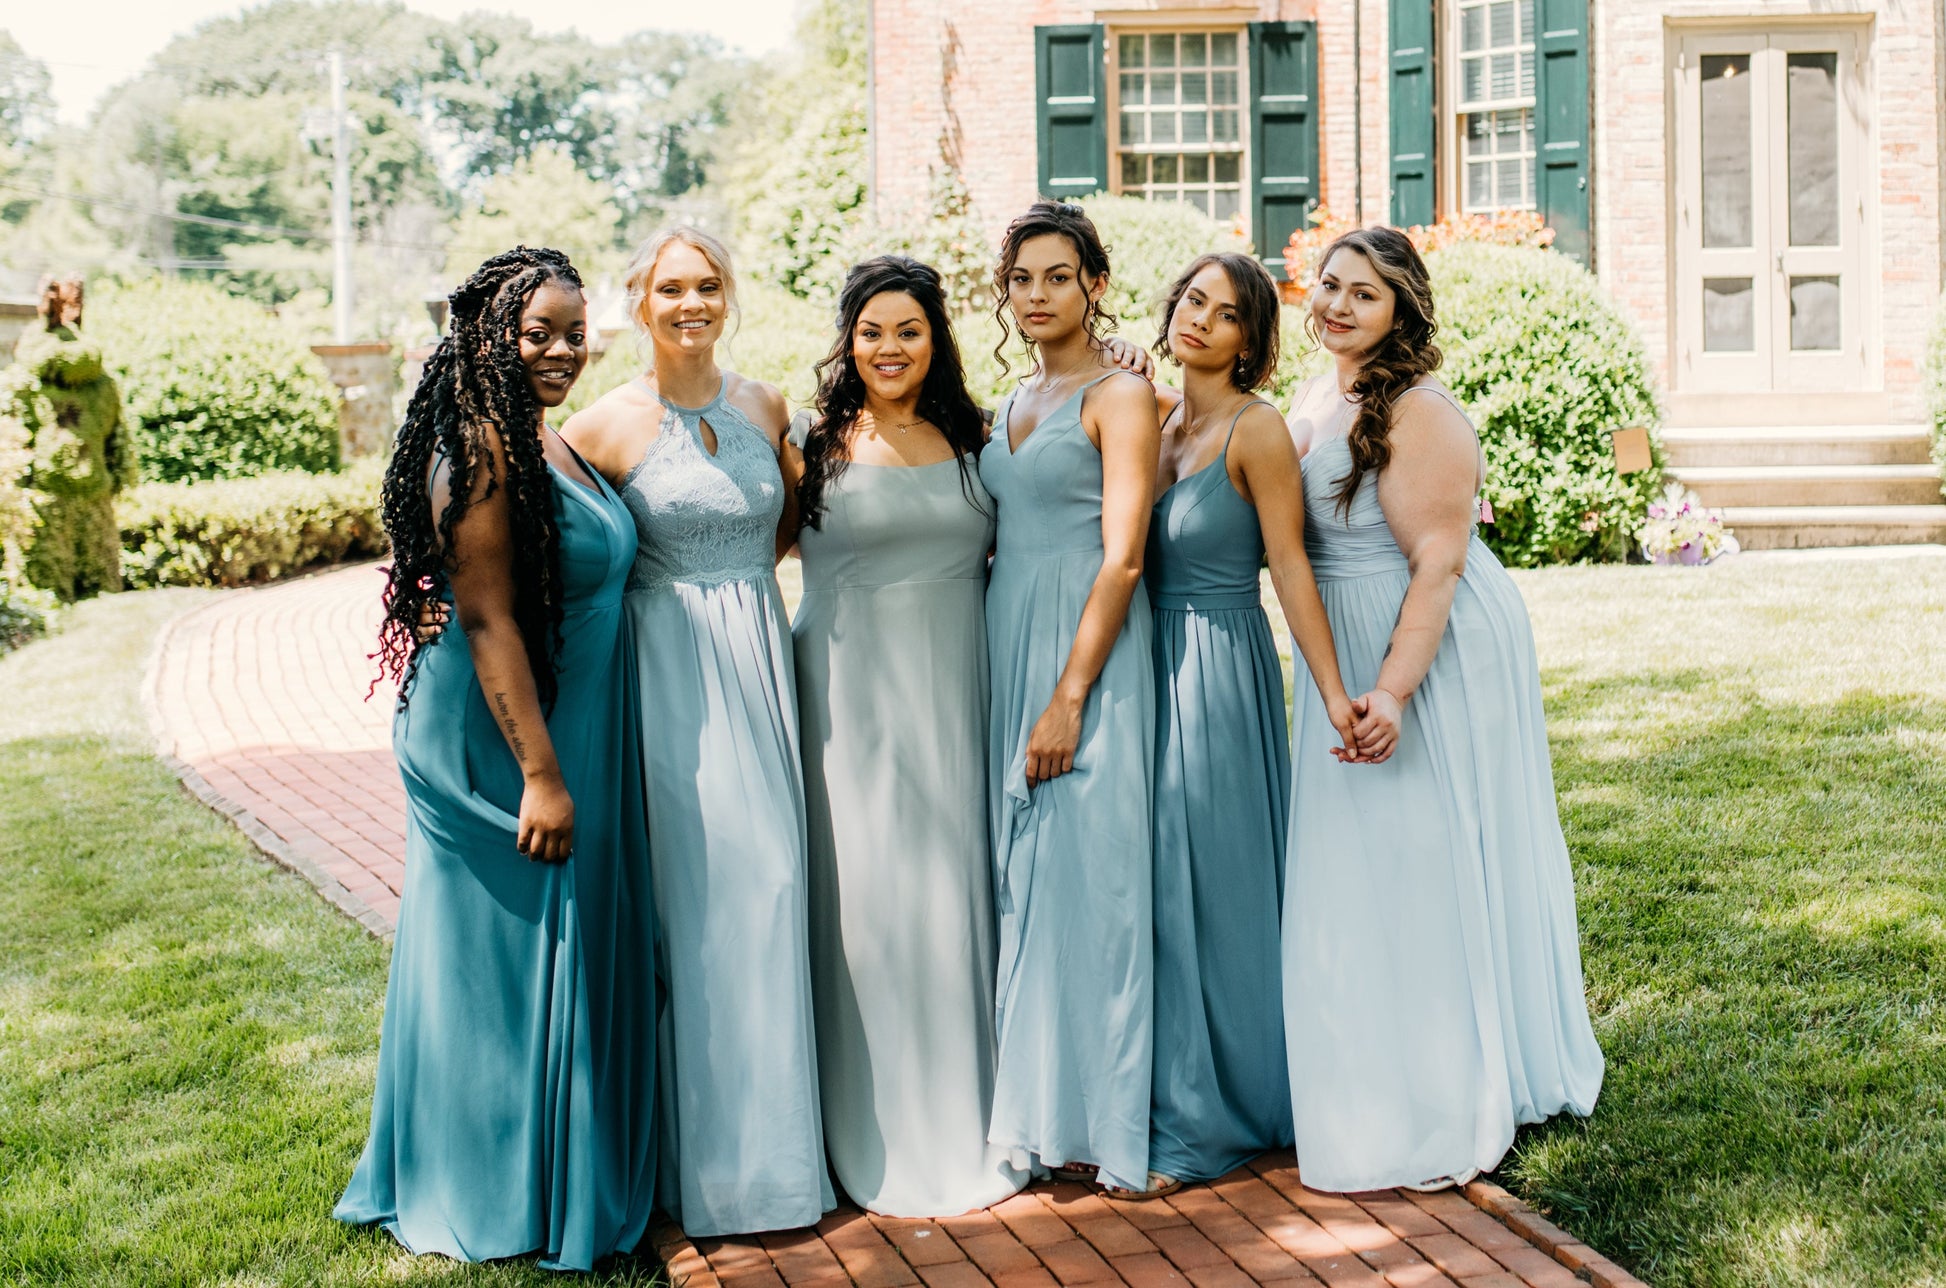 Erin (second from left) wears the Lila Dress